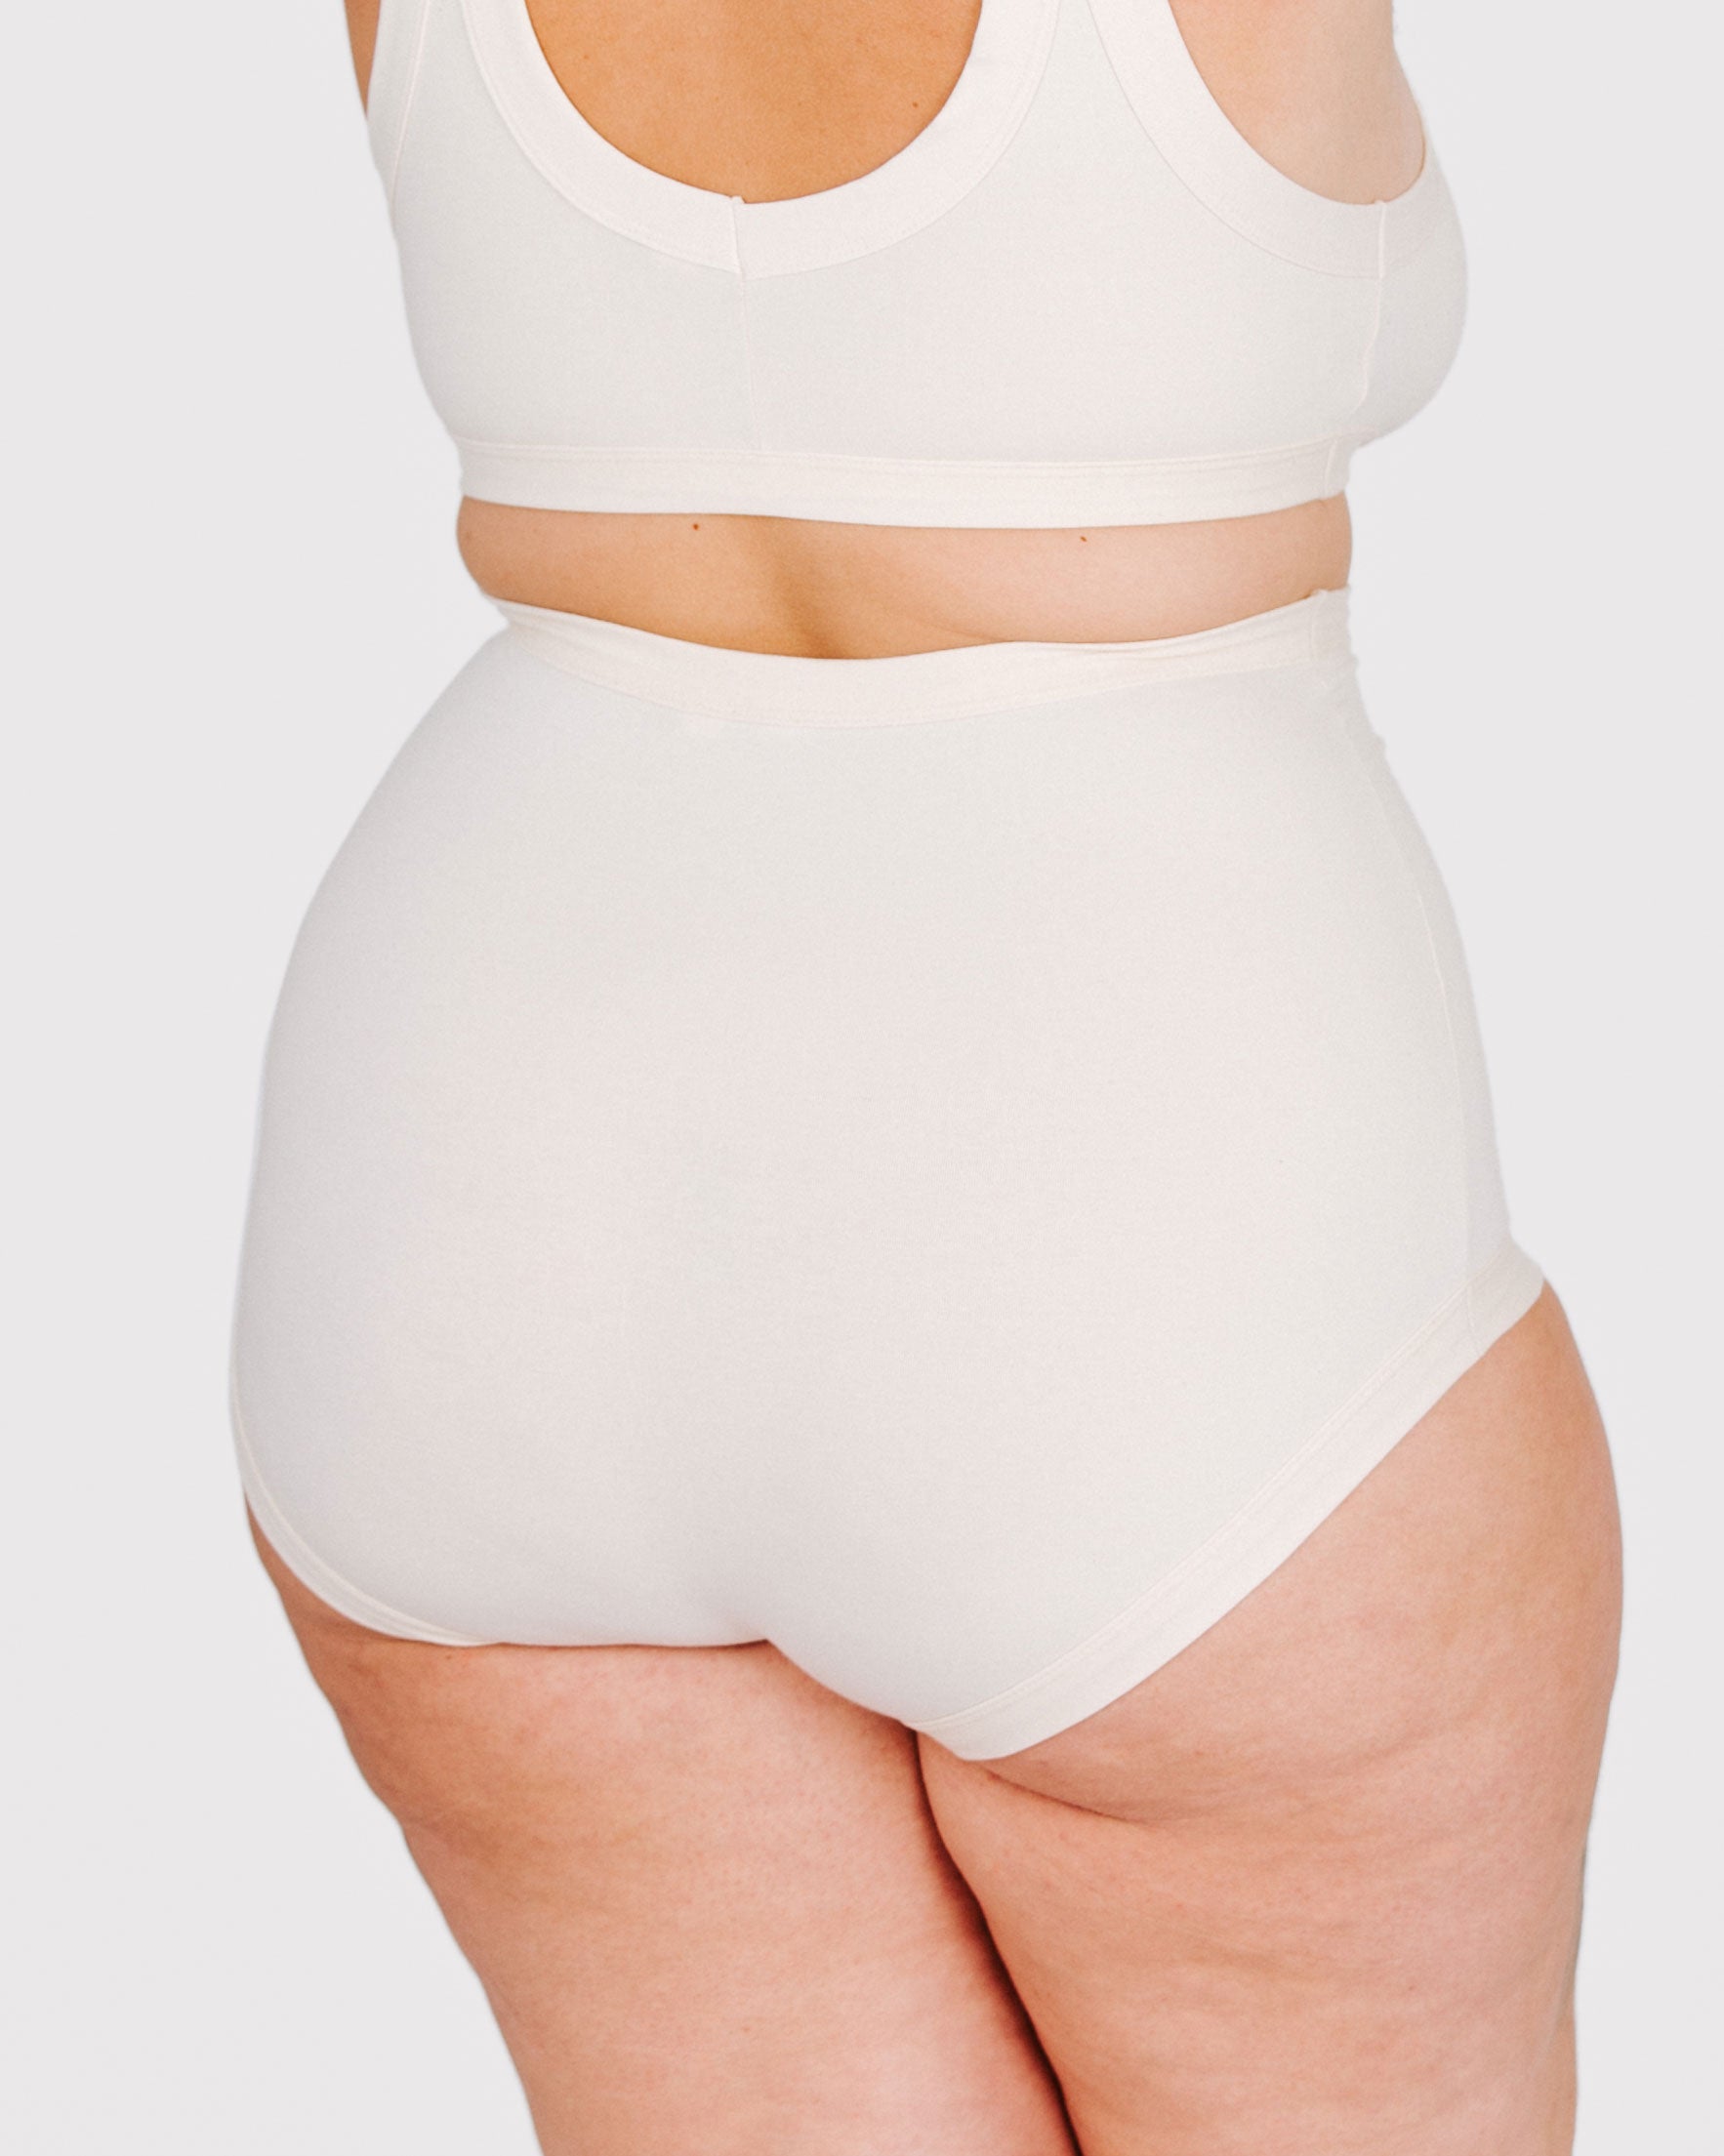 Fit photo from the back of Thunderpants organic cotton Sky Rise style underwear in off-white, showing a wedgie-free bum, on a model.